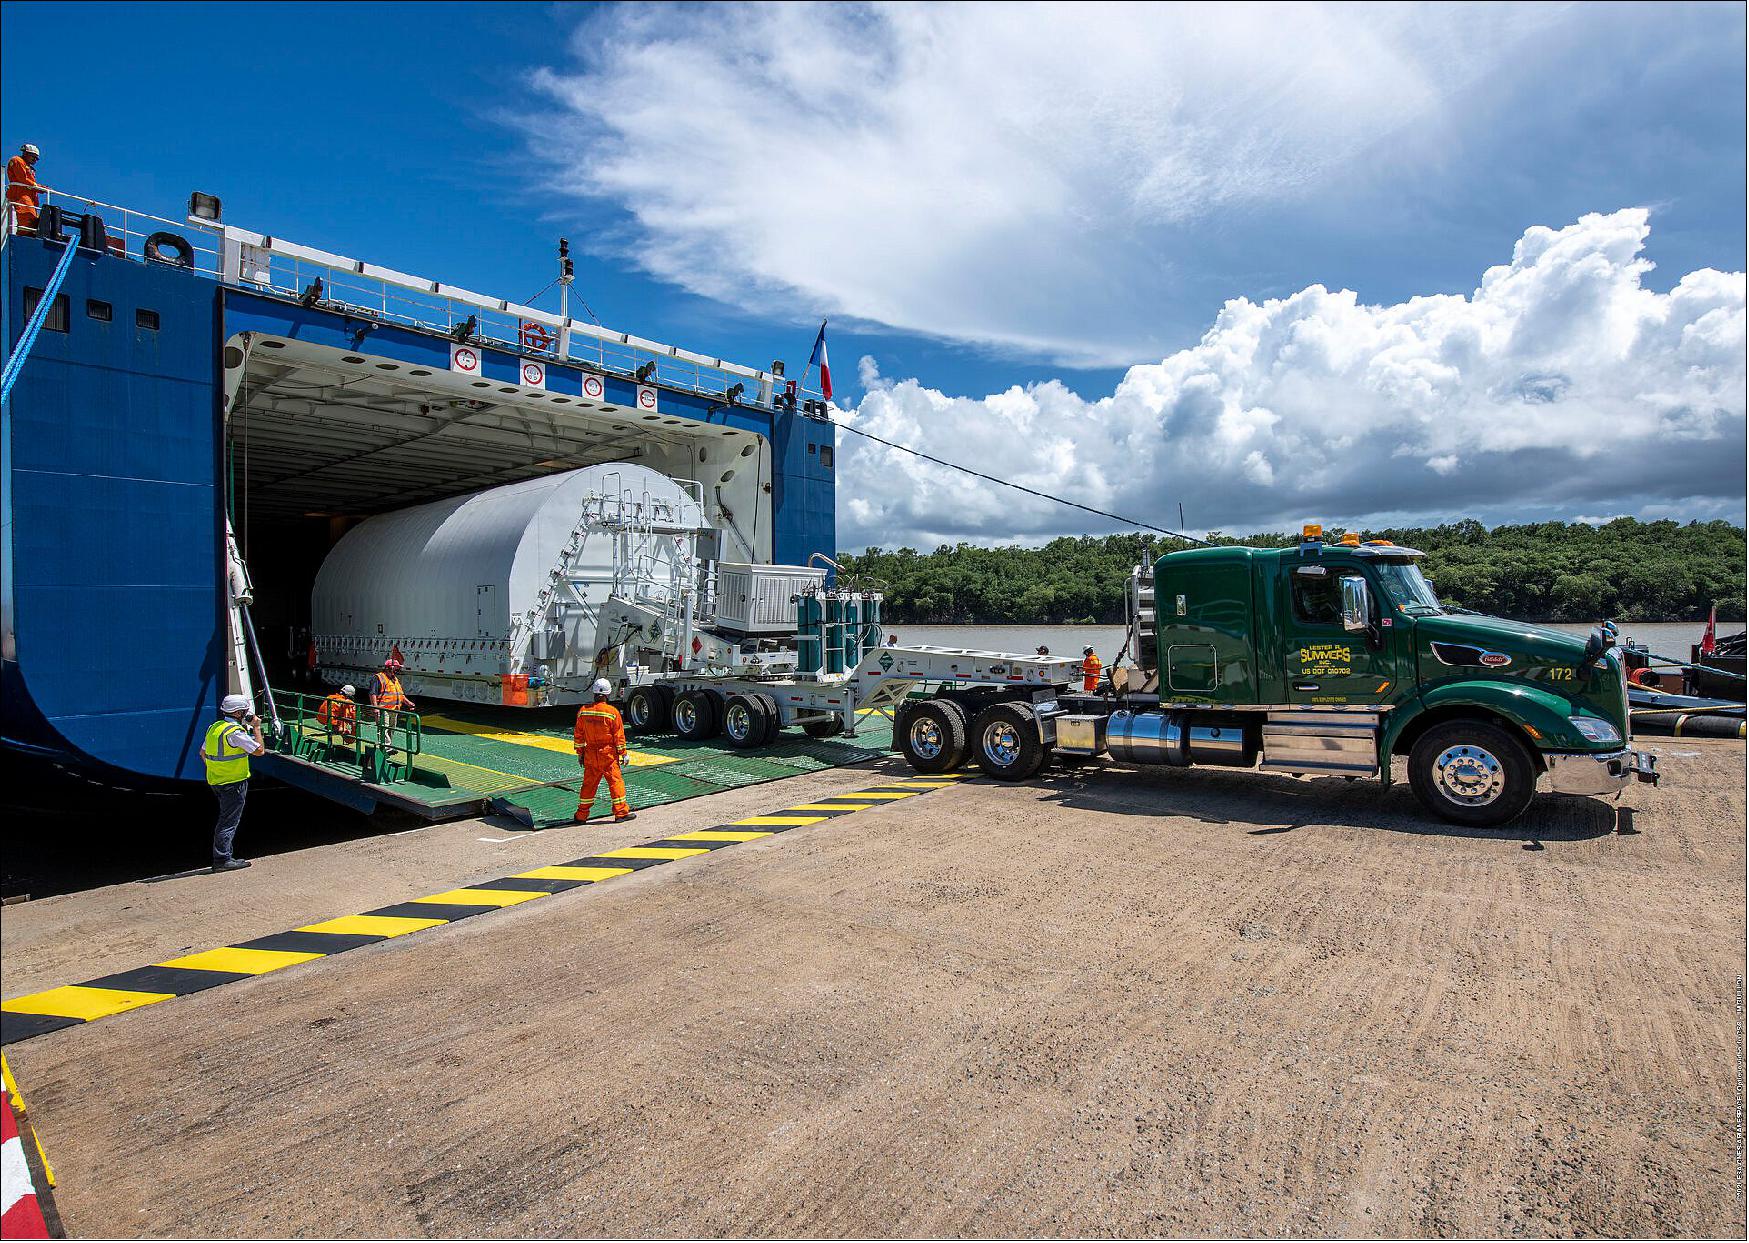 Figure 11: Webb arrives in French Guiana for launch on Ariane 5 (image credit: ESA/CNES/Arianespace)